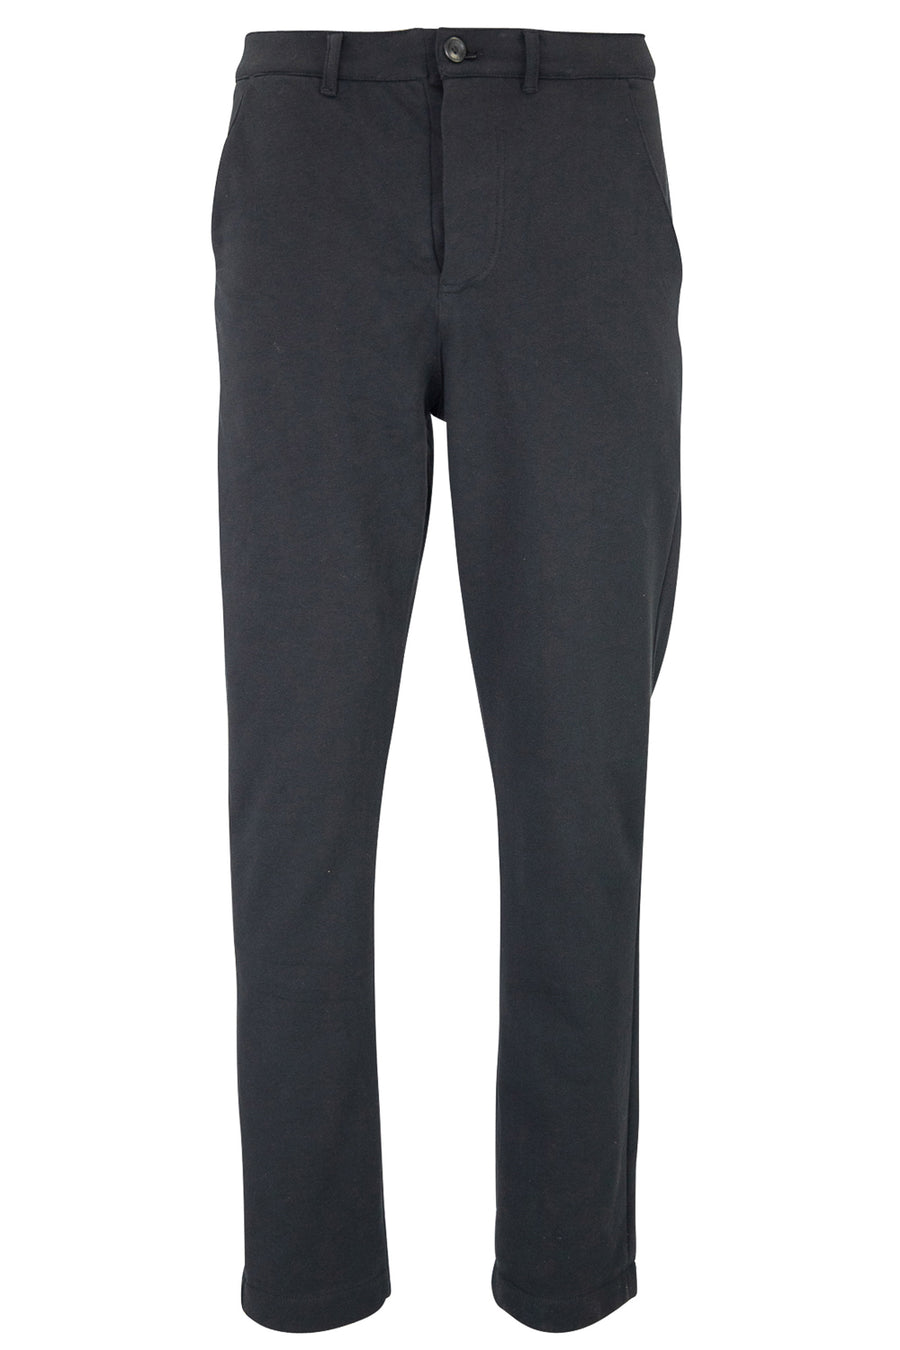 Buy the Hannes Roether Relaxed Fit Jersey Cotton Trousers in Black at Intro. Spend £50 for free UK delivery. Official stockists. We ship worldwide.